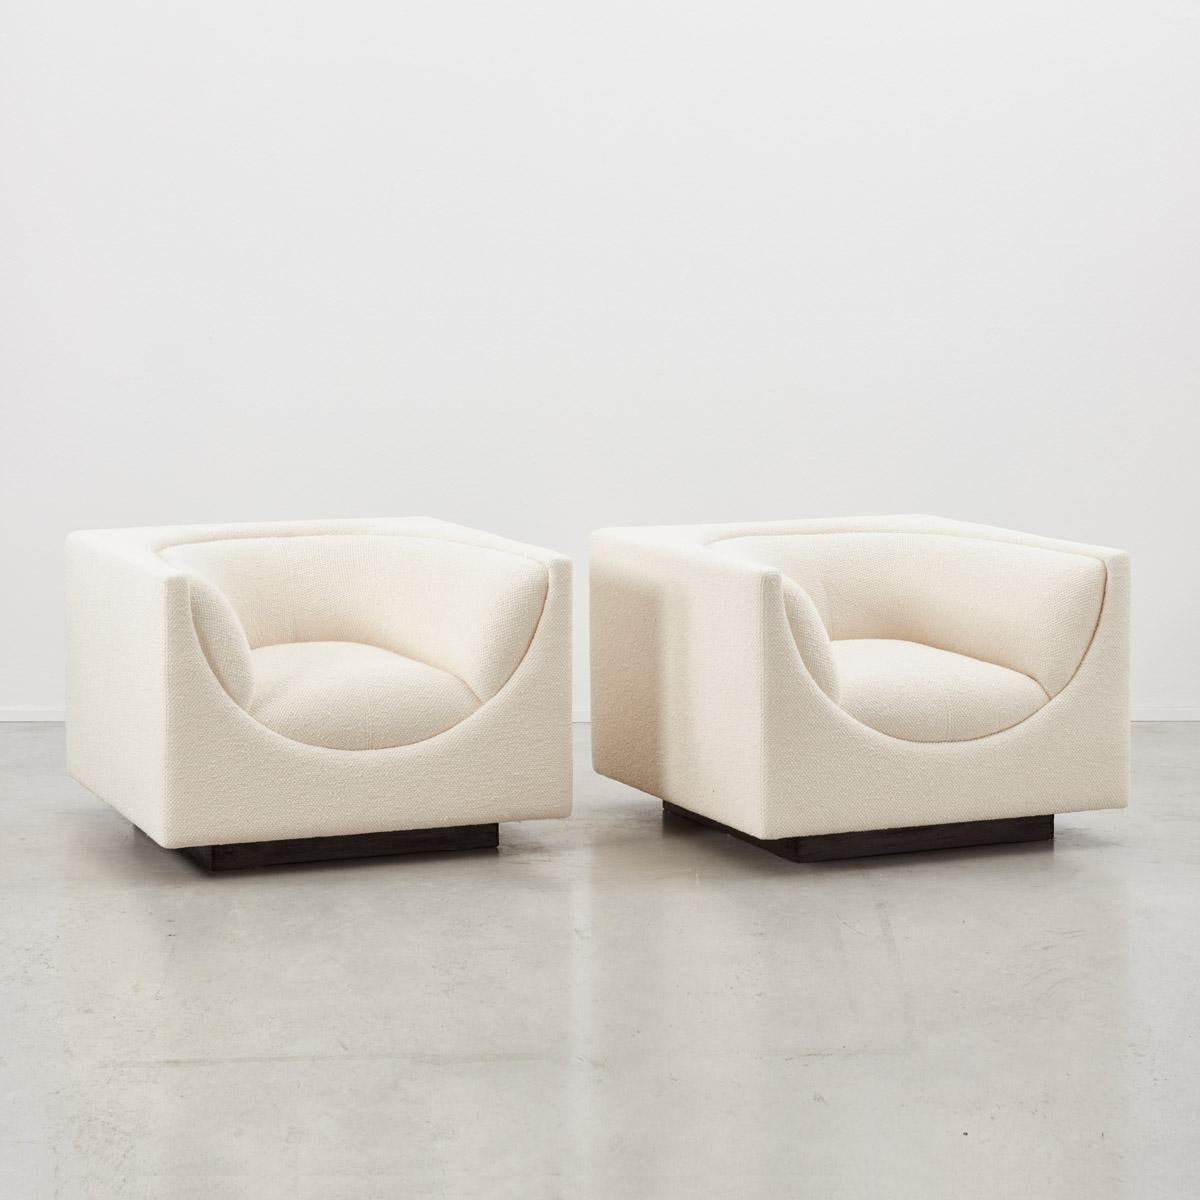 These 1970s Cubo chairs take cuboid forms and scoop out their core. They were designed by Jorge Zalszupin, a Polish architect who moved to Brazil, having been inspired by the works of Brazilians Oscar Niemeyer and Roberto Burle Marx.

Post World